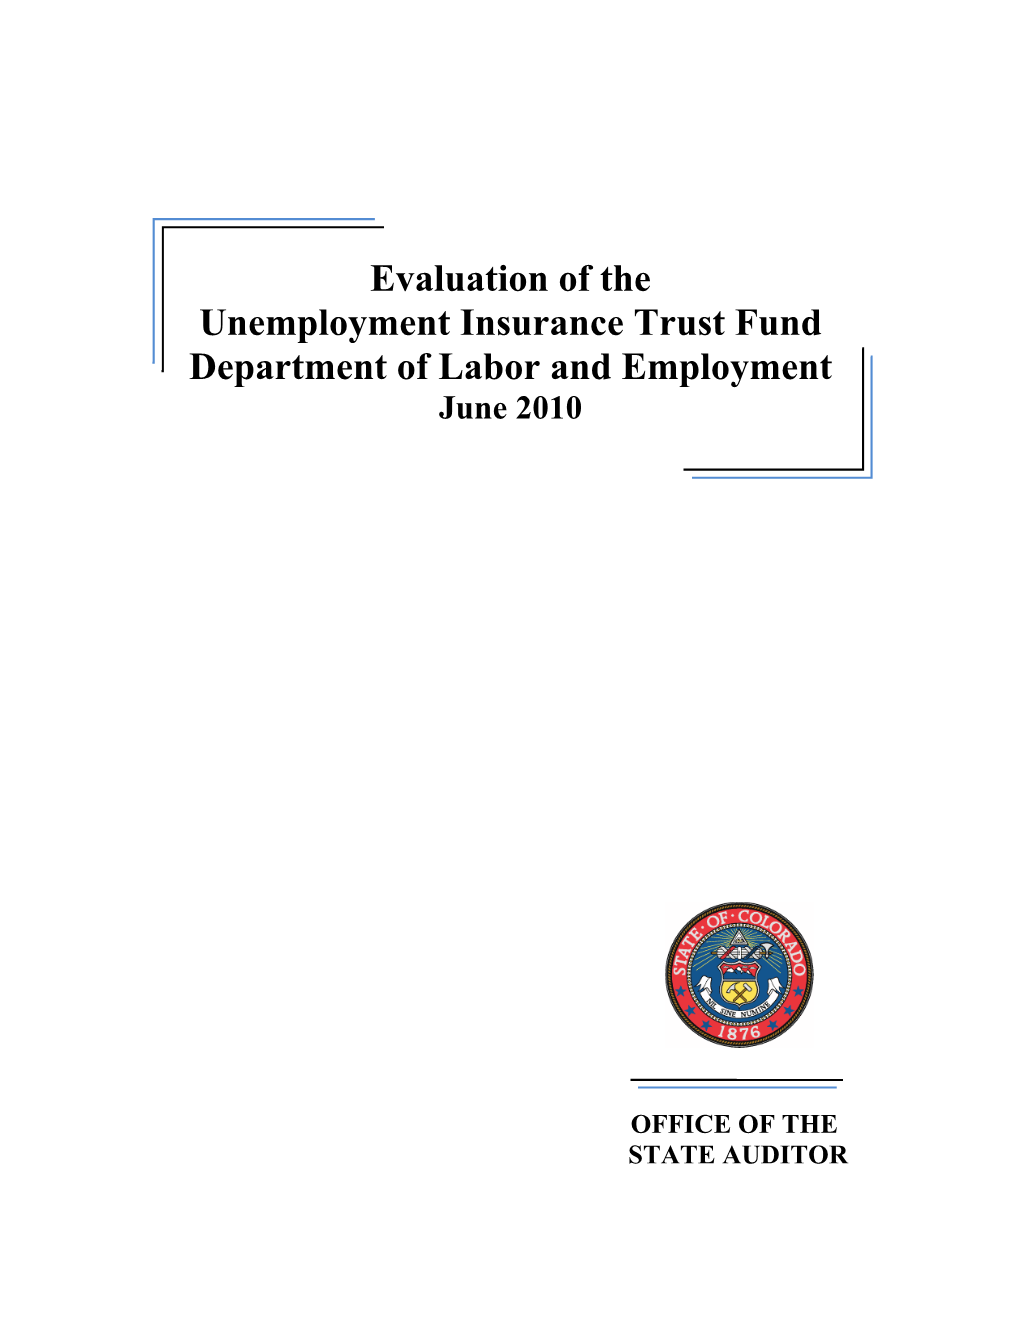 Evaluation of the Unemployment Insurance Trust Fund Department of Labor and Employment June 2010